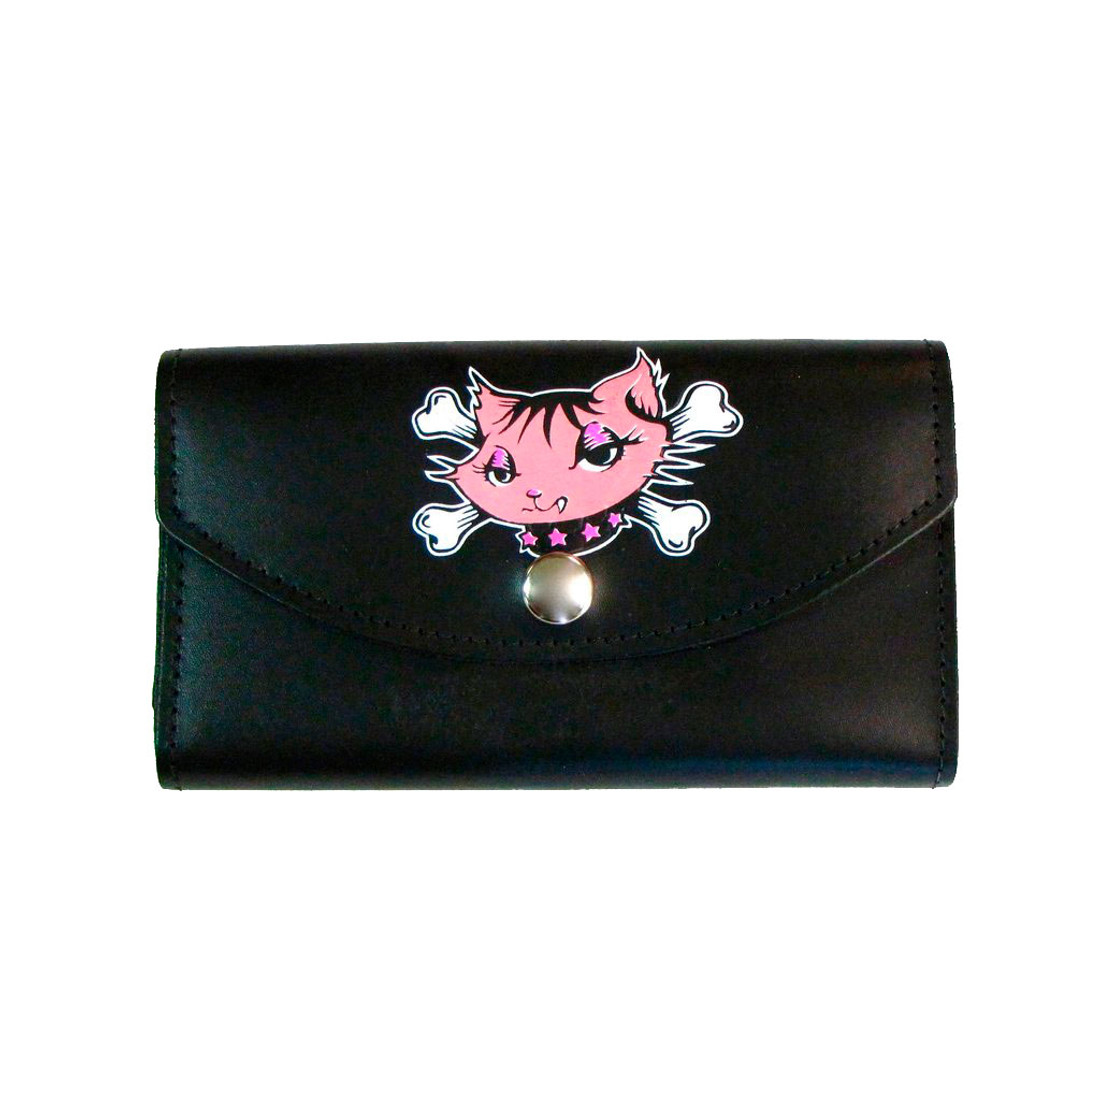 Women's Kitty with Crossbones Wallet Black Leather Checkbook Style Pocketbook